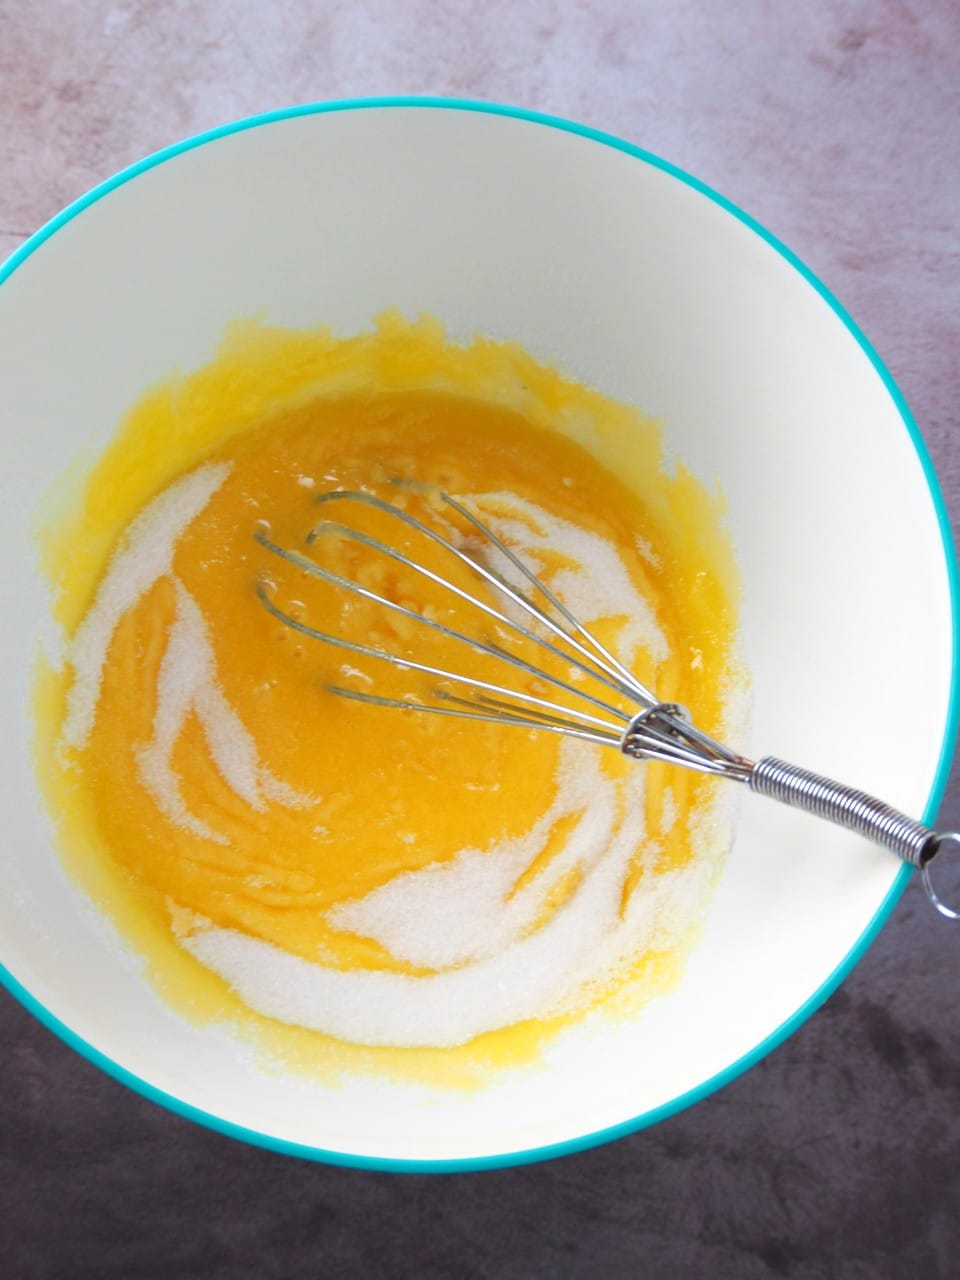 Mixing the egg yolks and sugar to make the batter for Taisan.